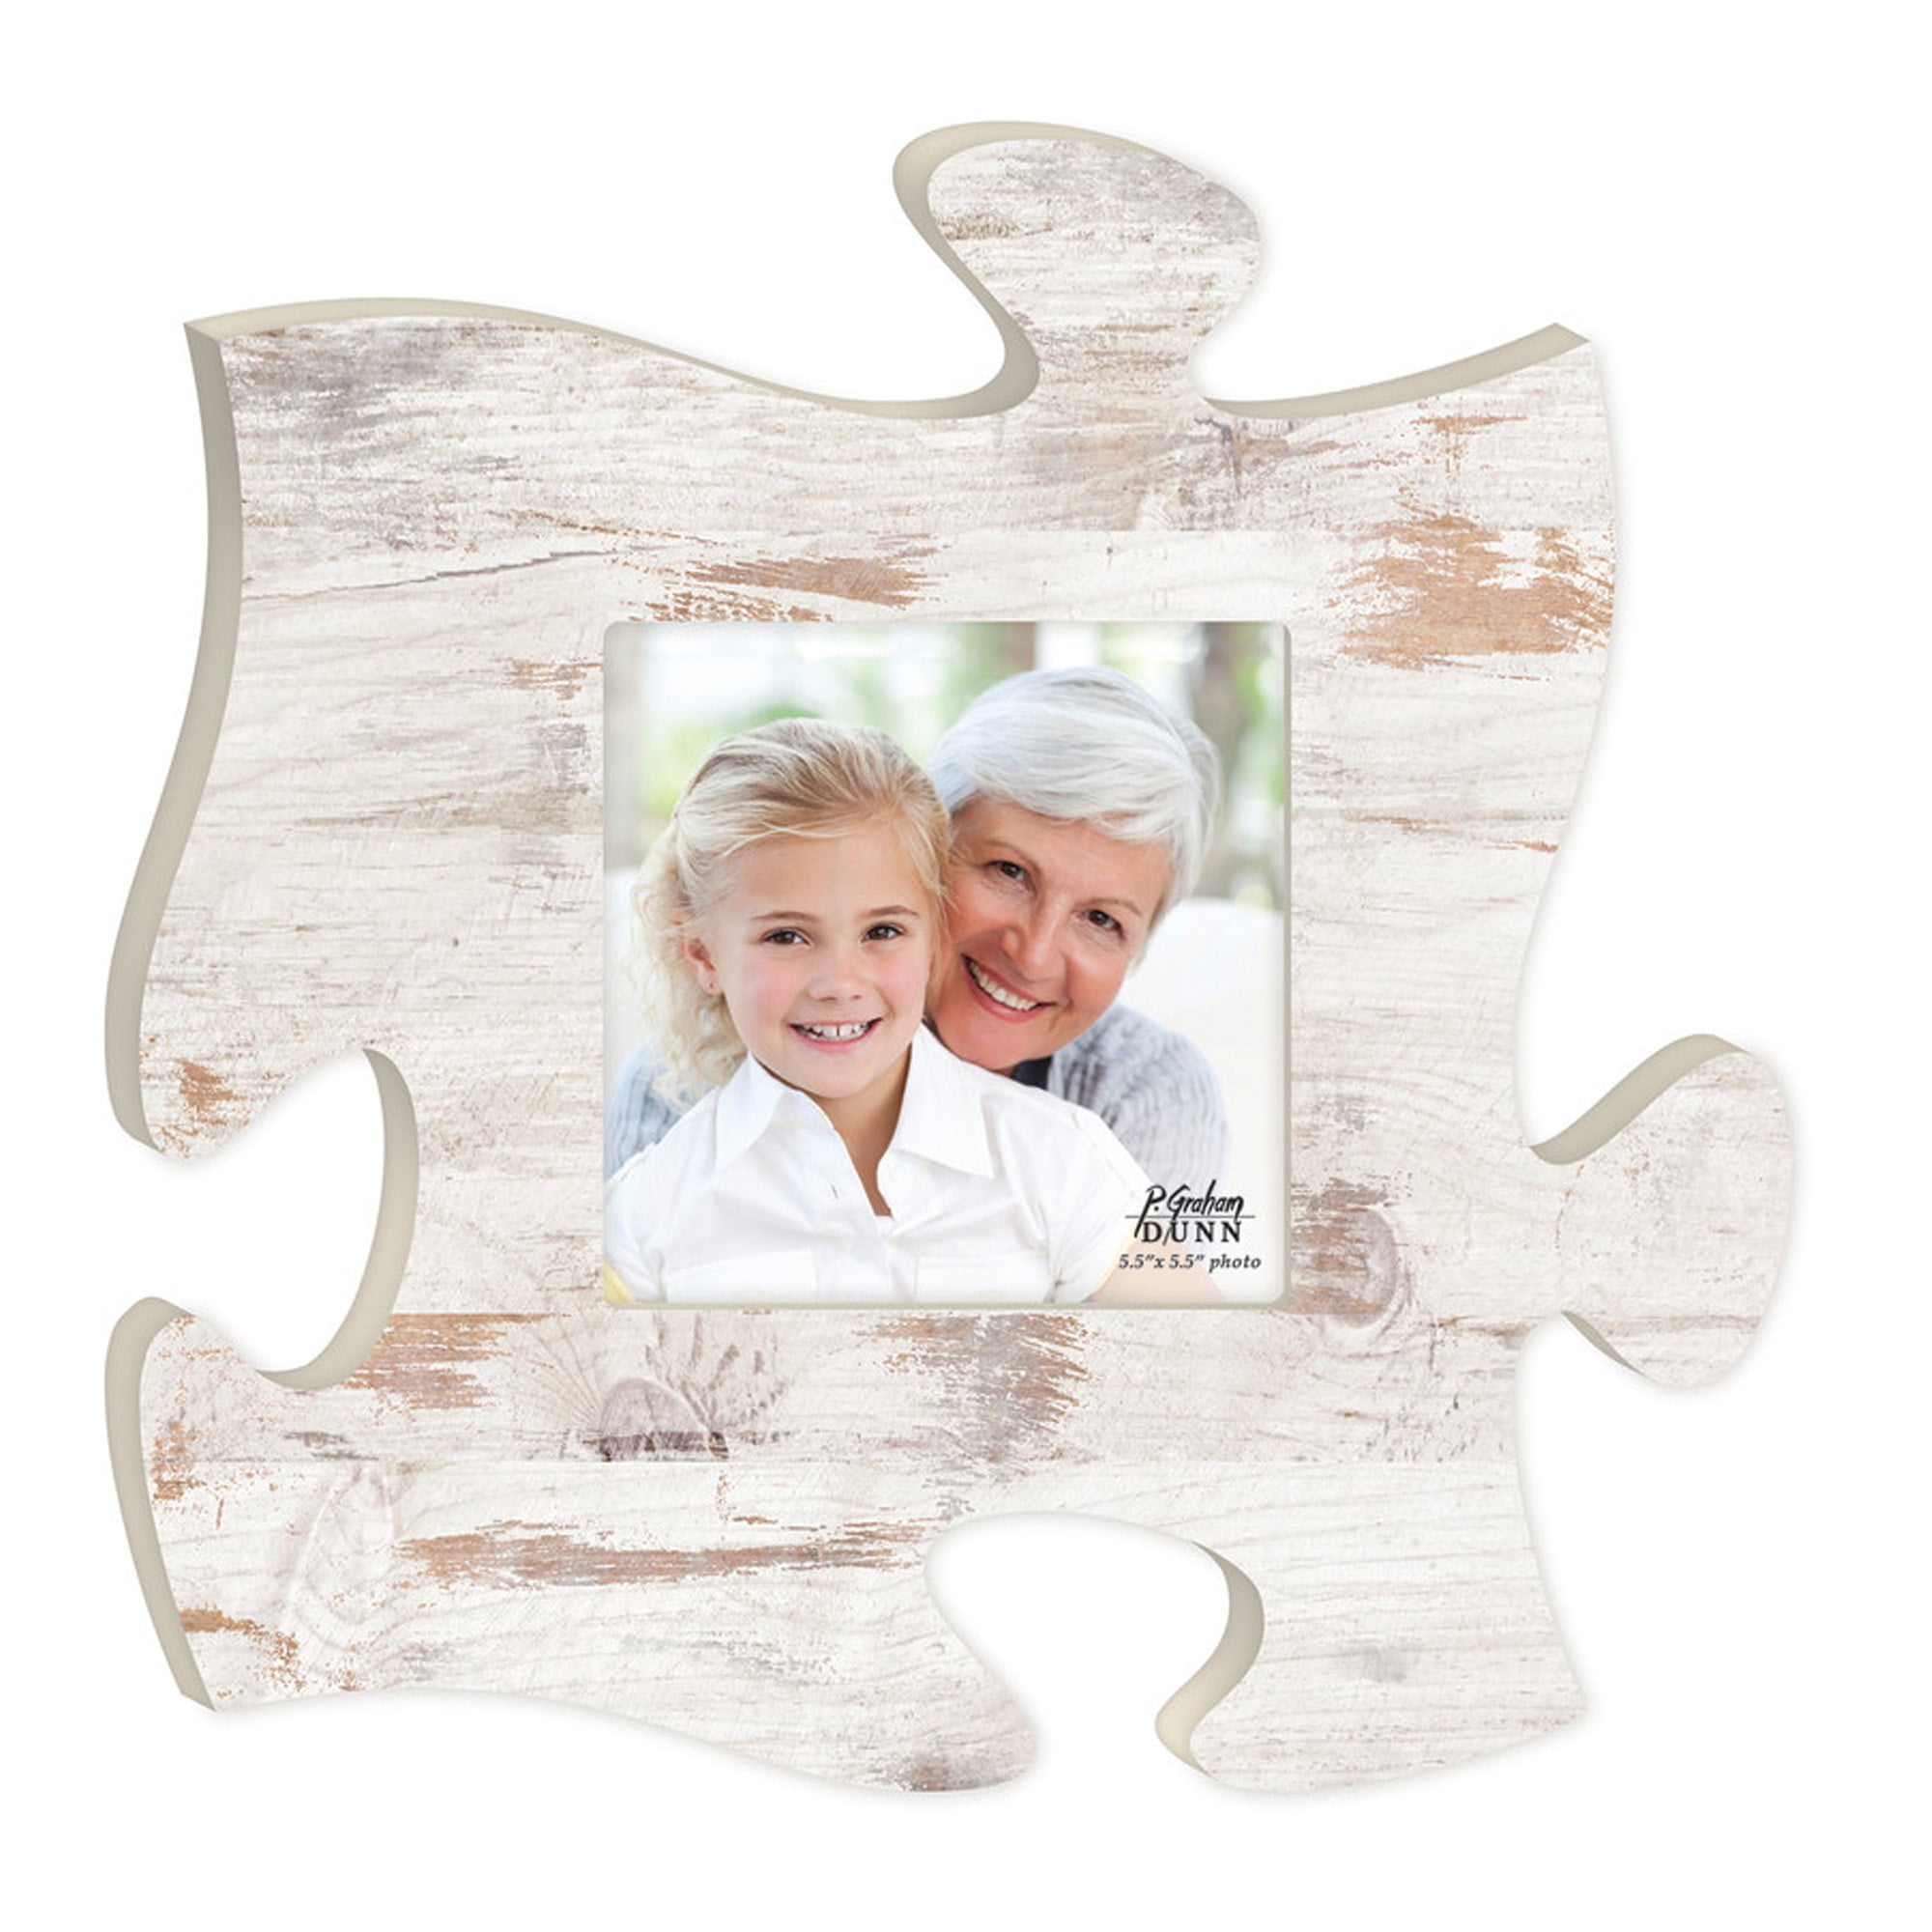 Weathered White Wash 6 x 6 Wood Puzzle Wall Plaque Photo Frame 